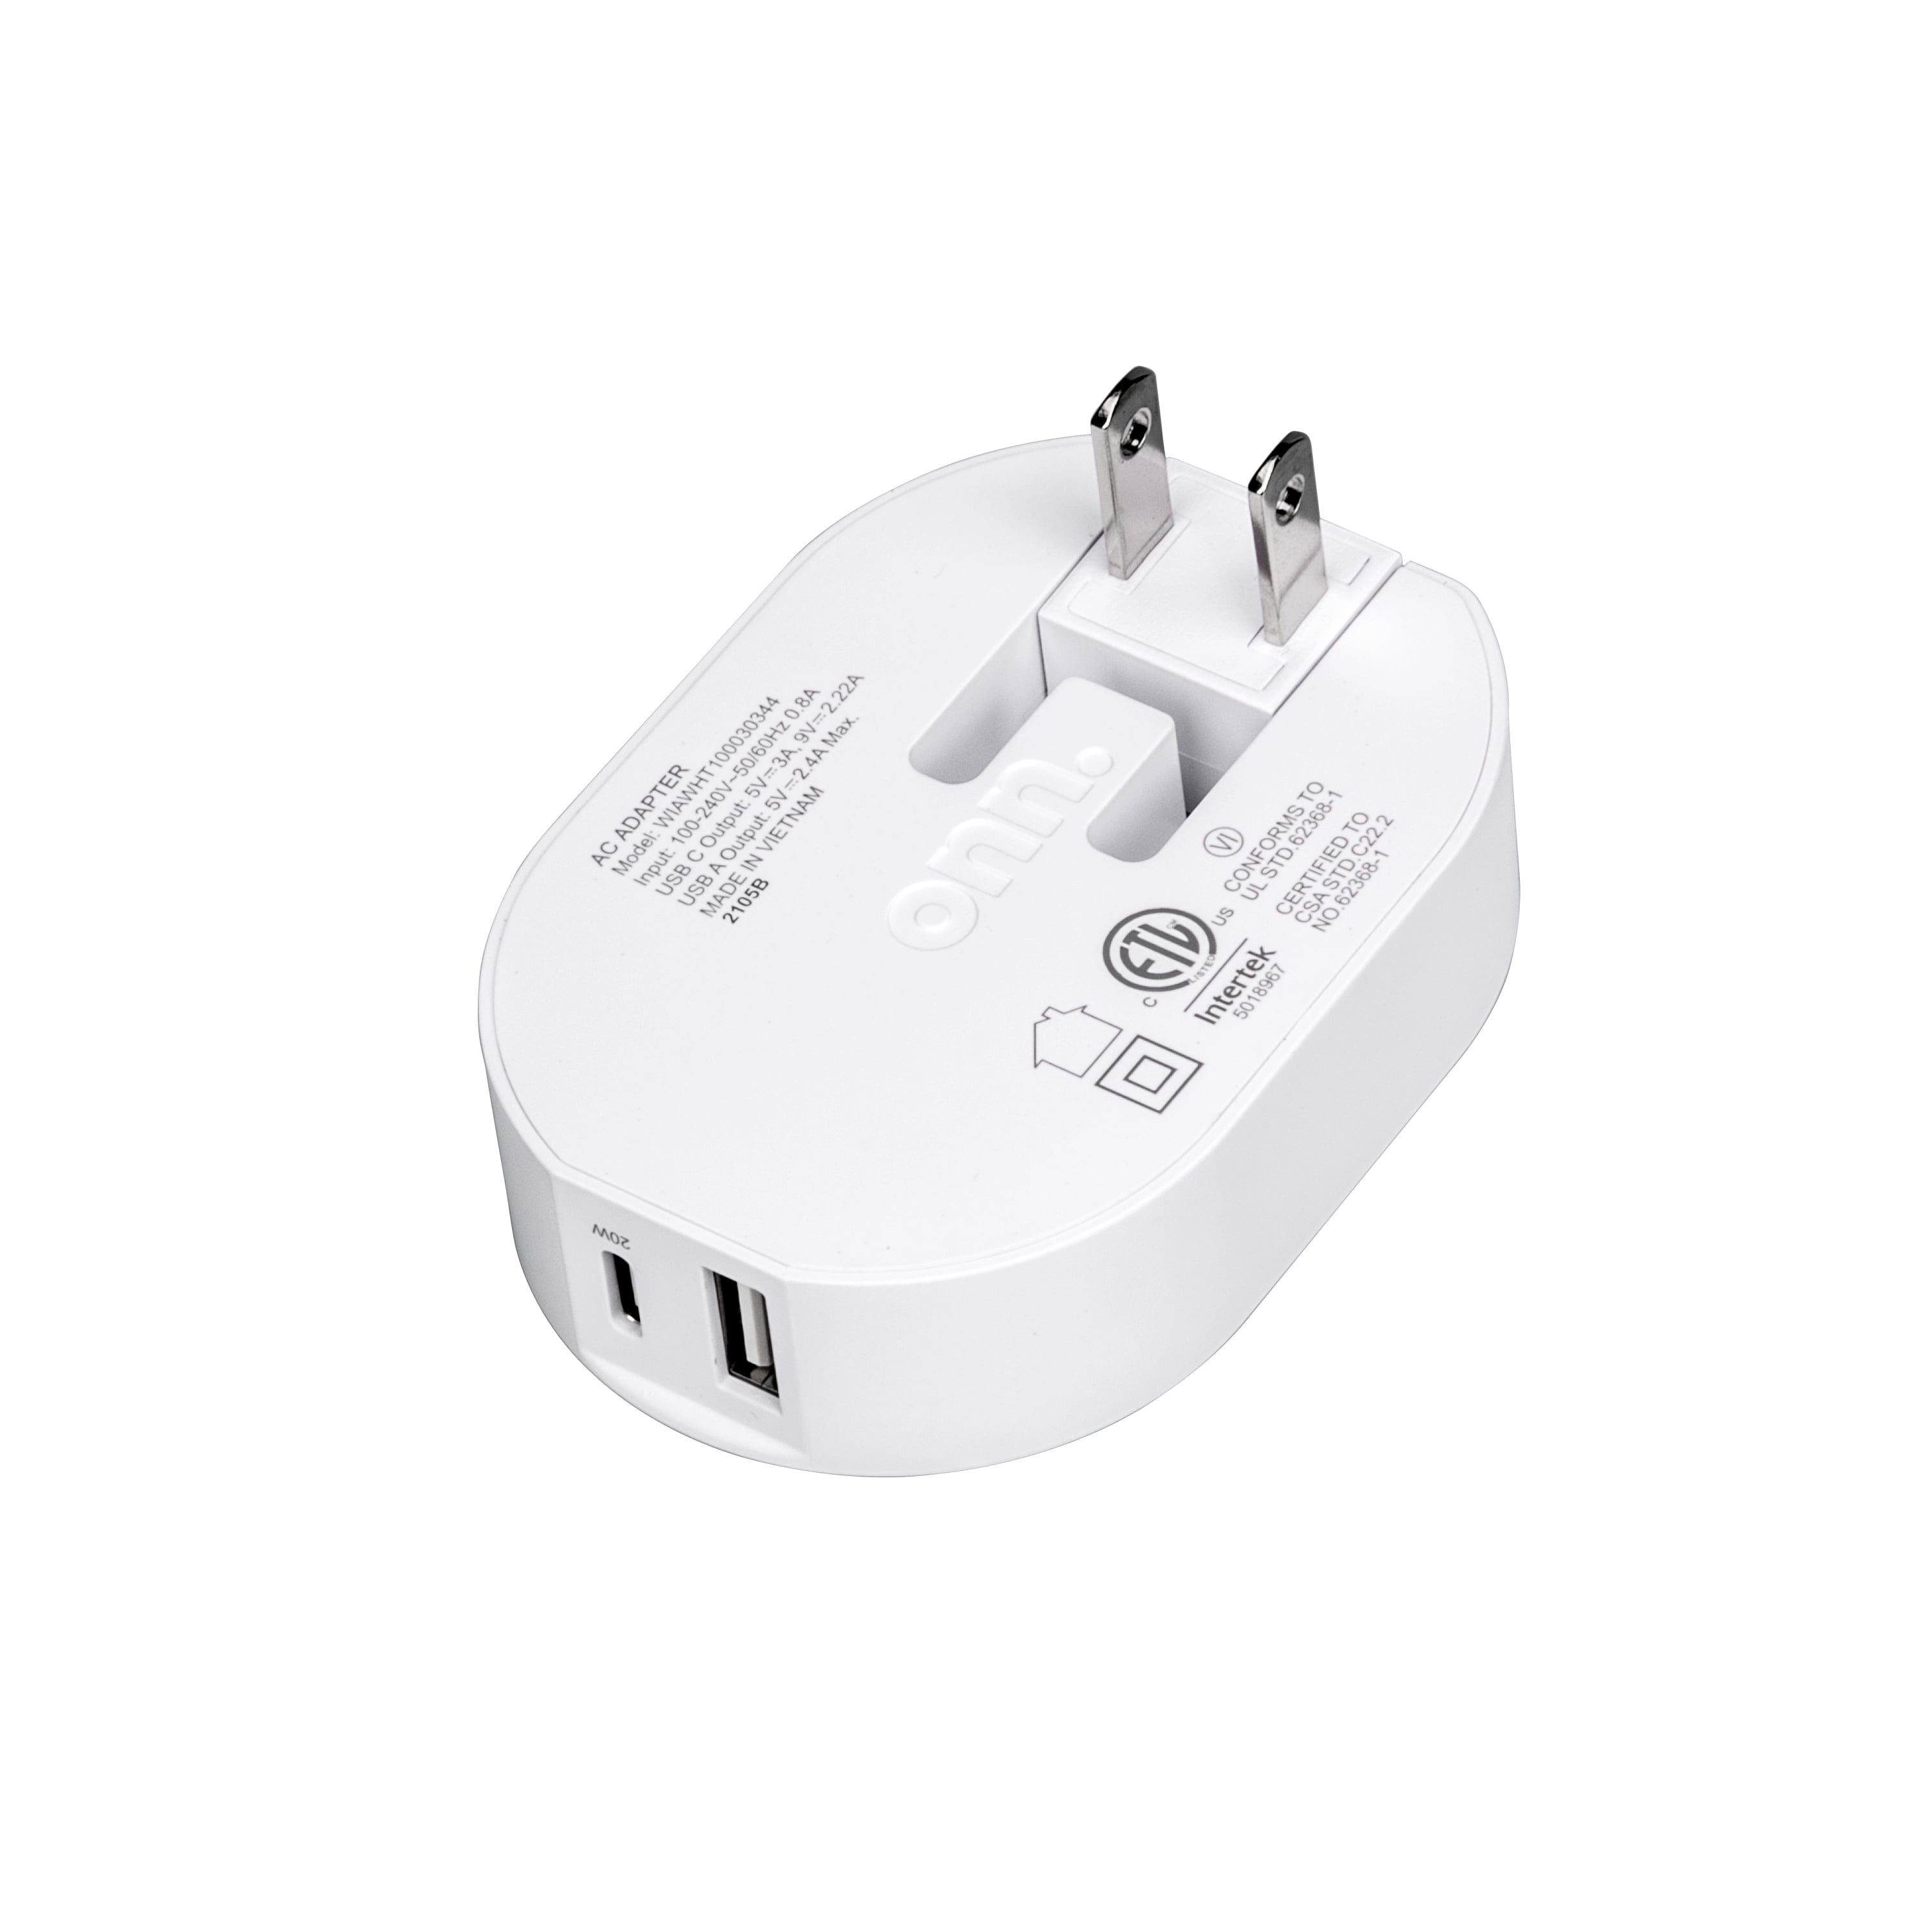 onn. 32W Dual-Port Wall Charger, 20W USB-C Port Fast Charger with Power Delivery; 12W USB Port Standard Charges. USB-C Power Delivery Compatible iPhone 12, 12 Pro, 12 Pro Max, iPad and